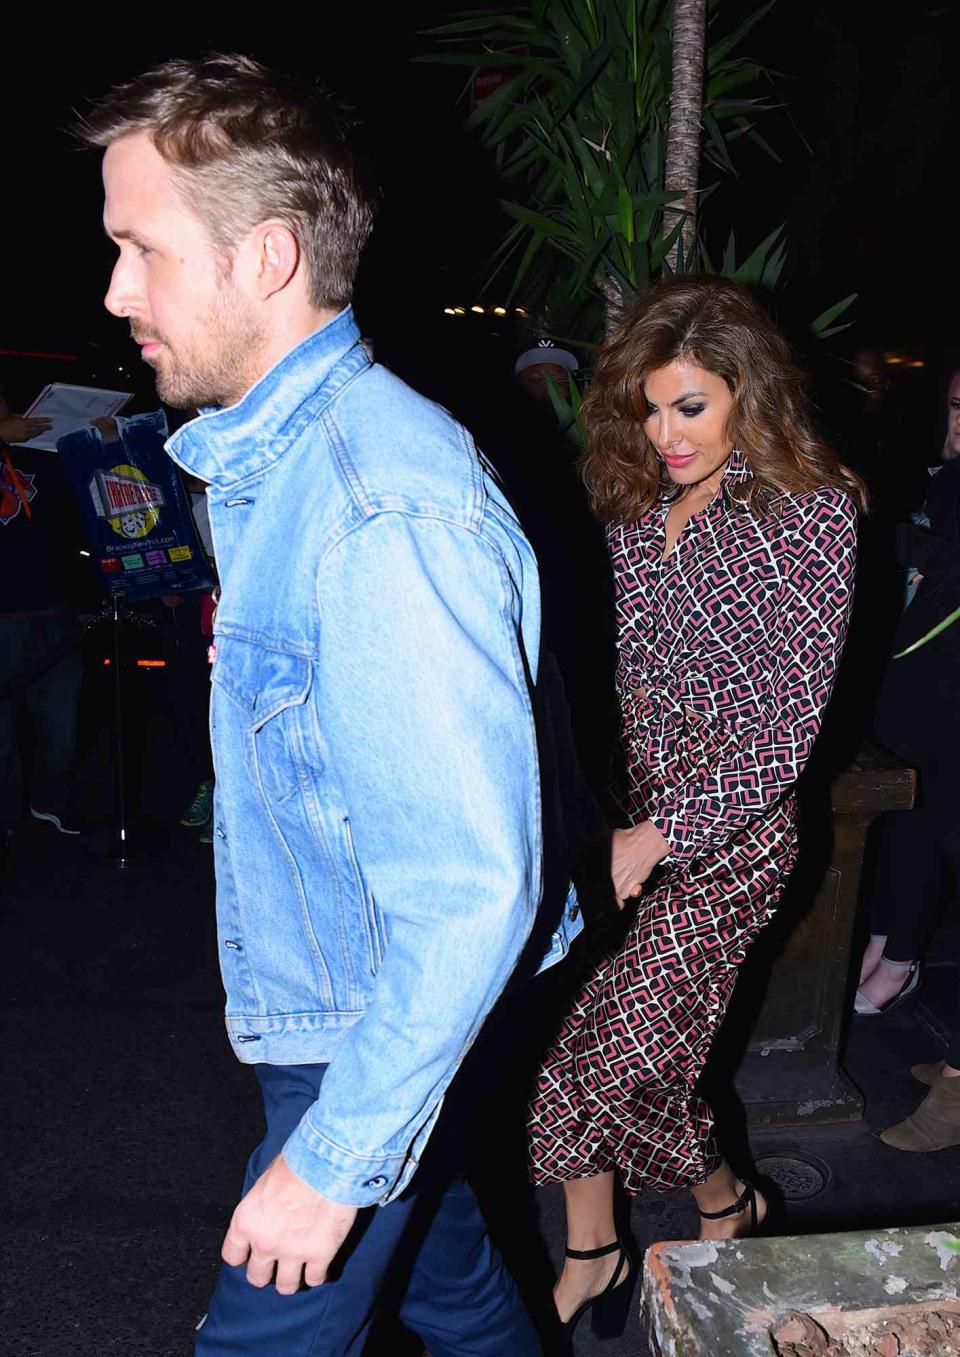 Ryan Gosling and Eva Mendes seen at Tao Restaurant for SNL after party on September 30, 2017 in New York City